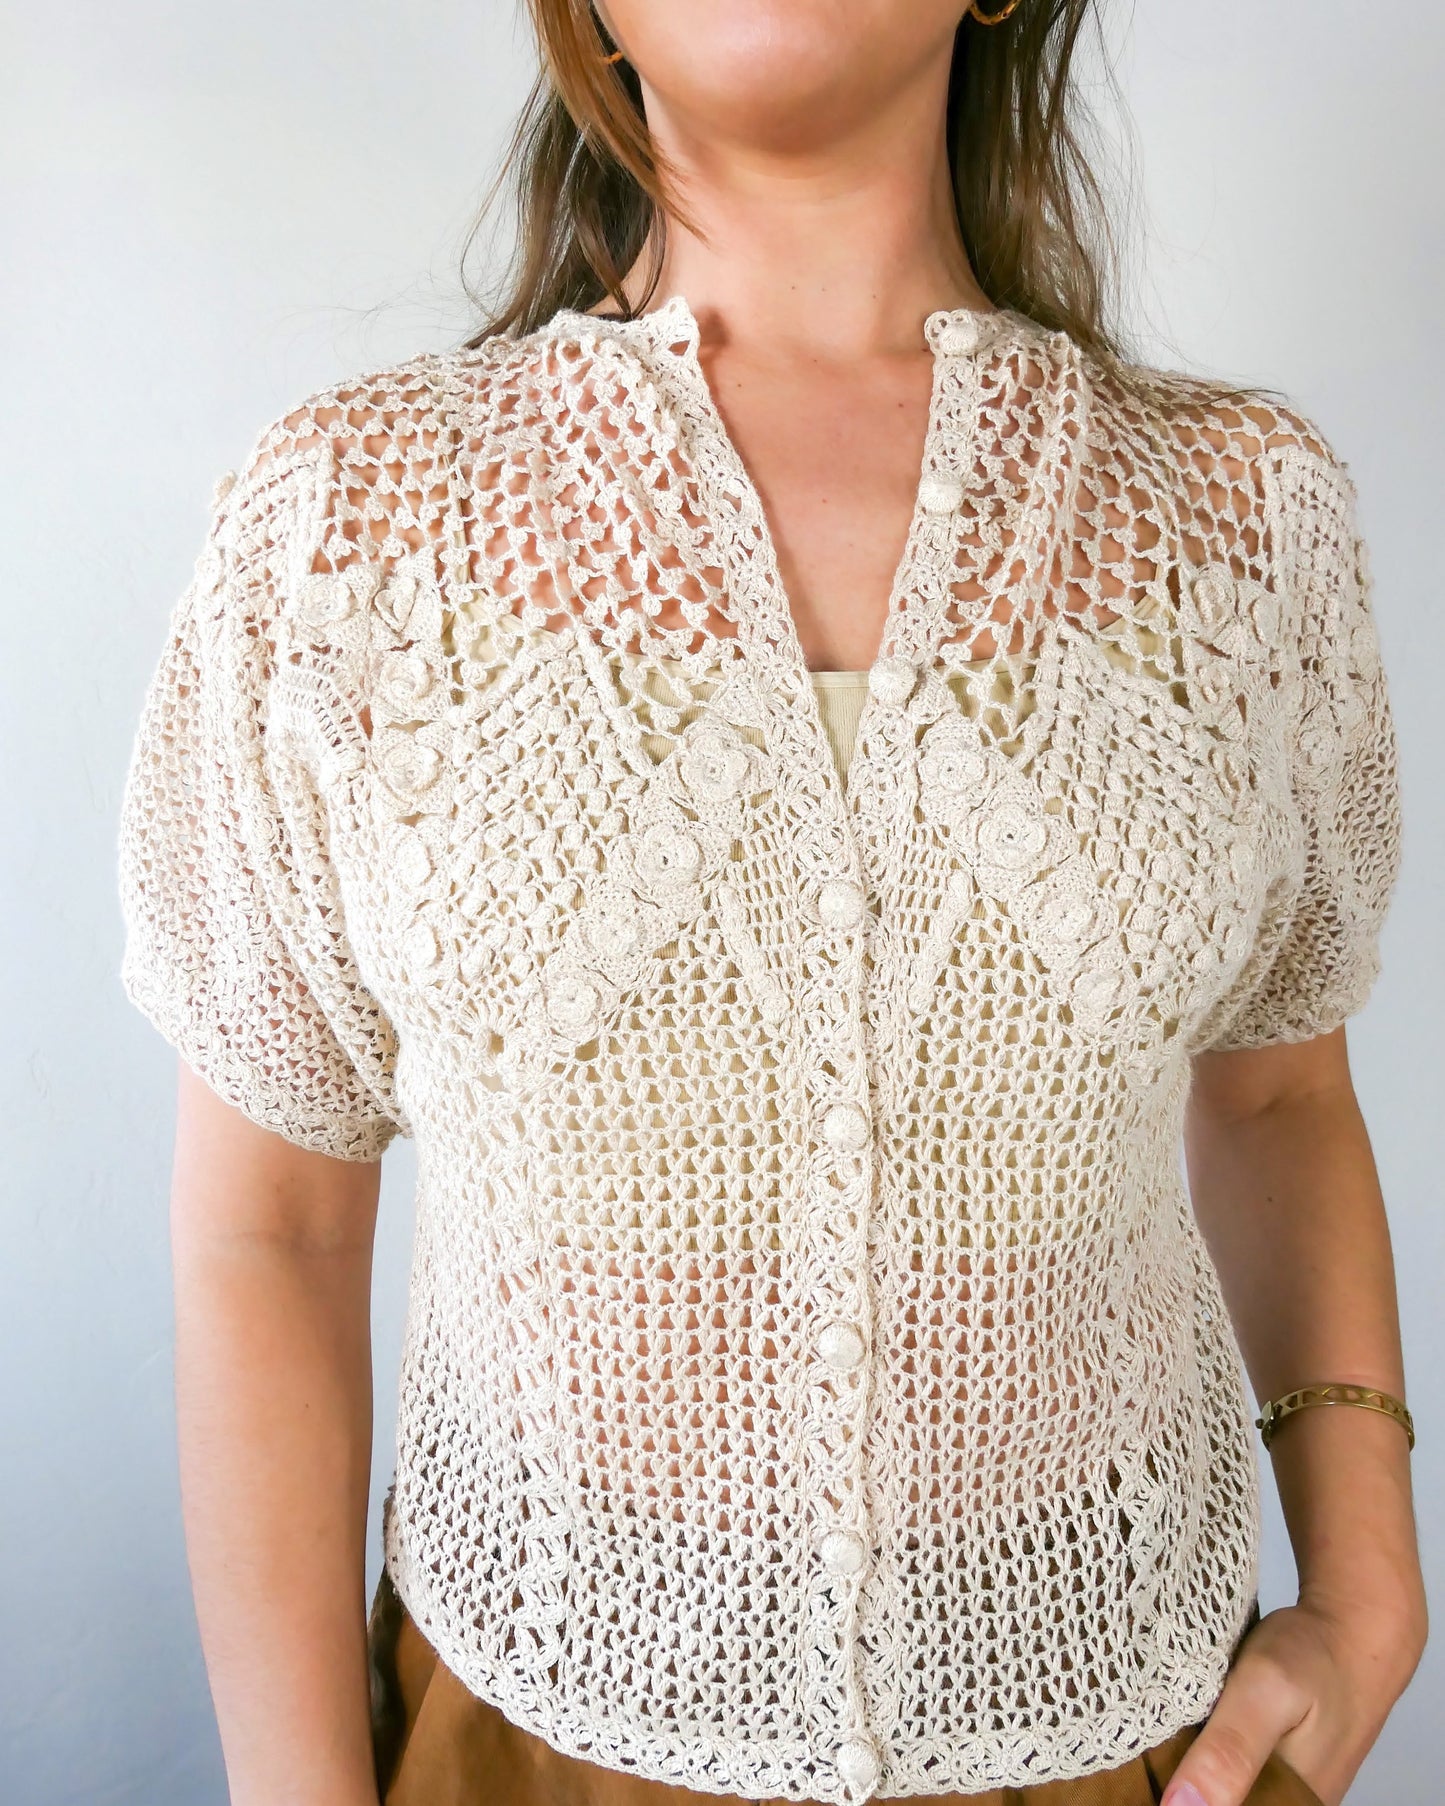 Closeup of top. A classic Lim's Vintage hand crocheted button down top with a beautiful zig zag pattern on both the front and back, with lighter stitching around the chest and shoulders to bring a sense of lightness and space to the neckline. Petite flower buds sprout up from and accent the edges of the zig zag. This natural color top is versatile, comfortable, and adds a beautiful vintage accent to your wardrobe.